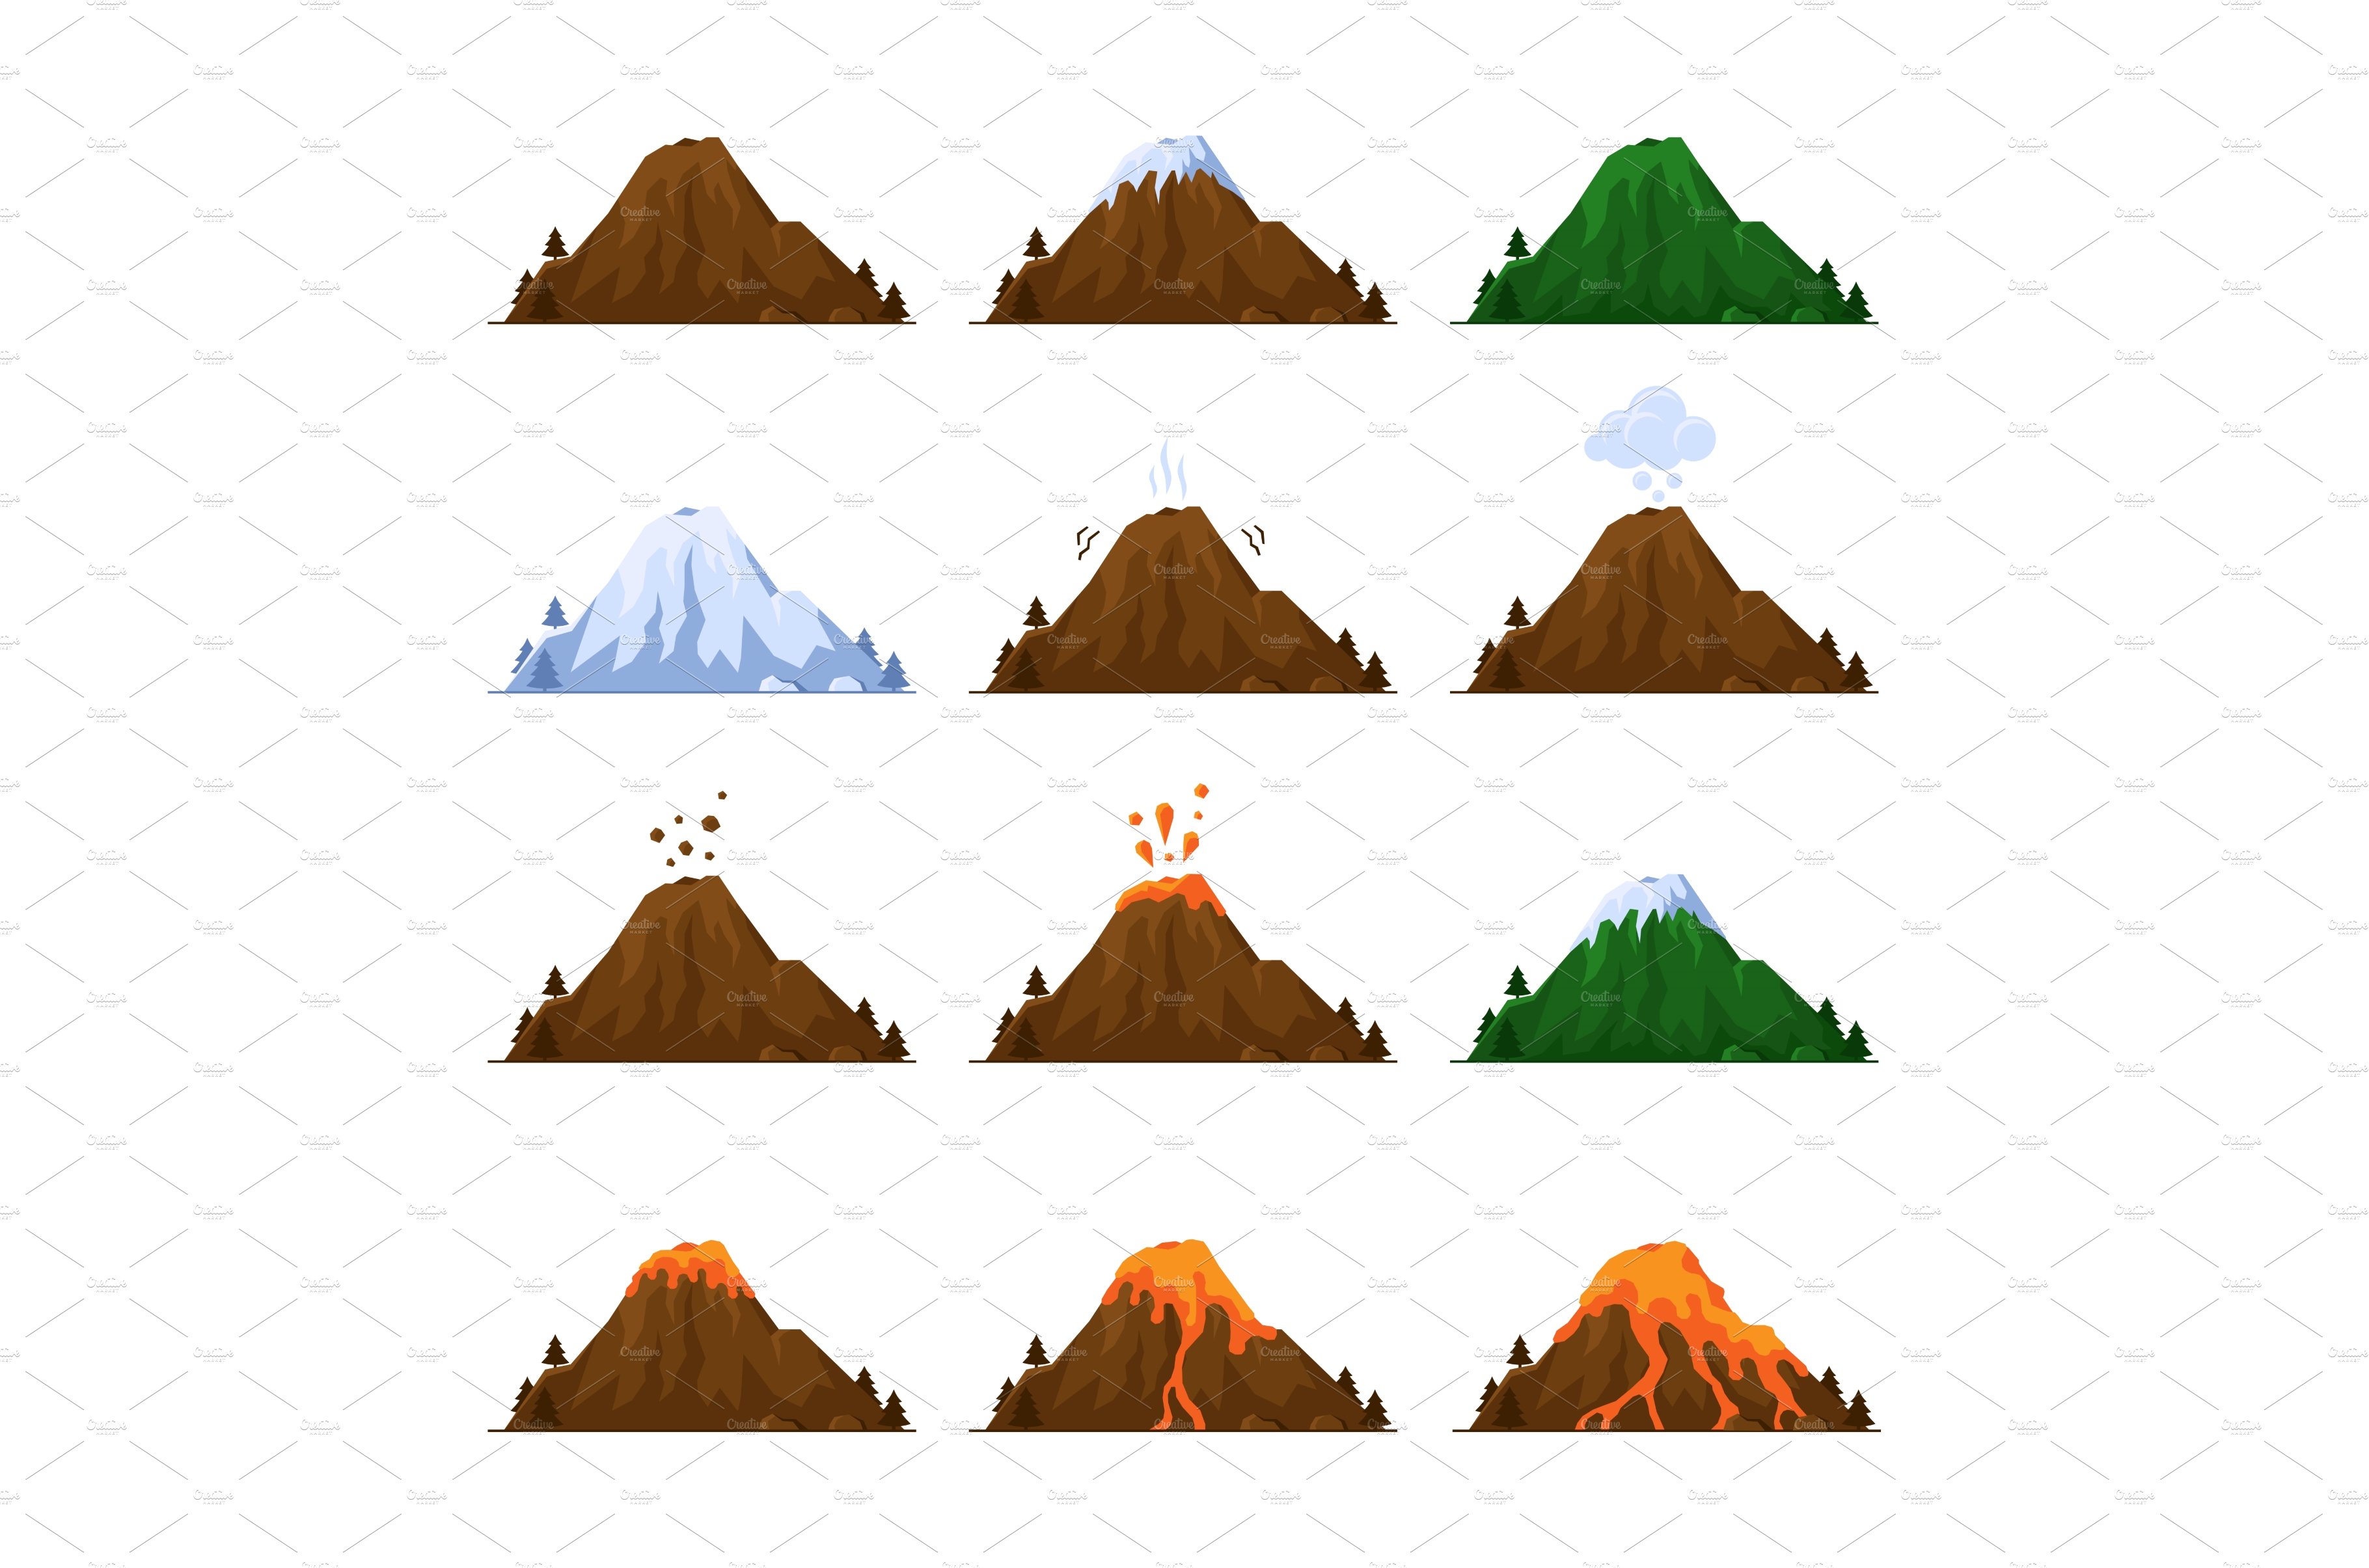 Mountain with Volcano Icons Set cover image.